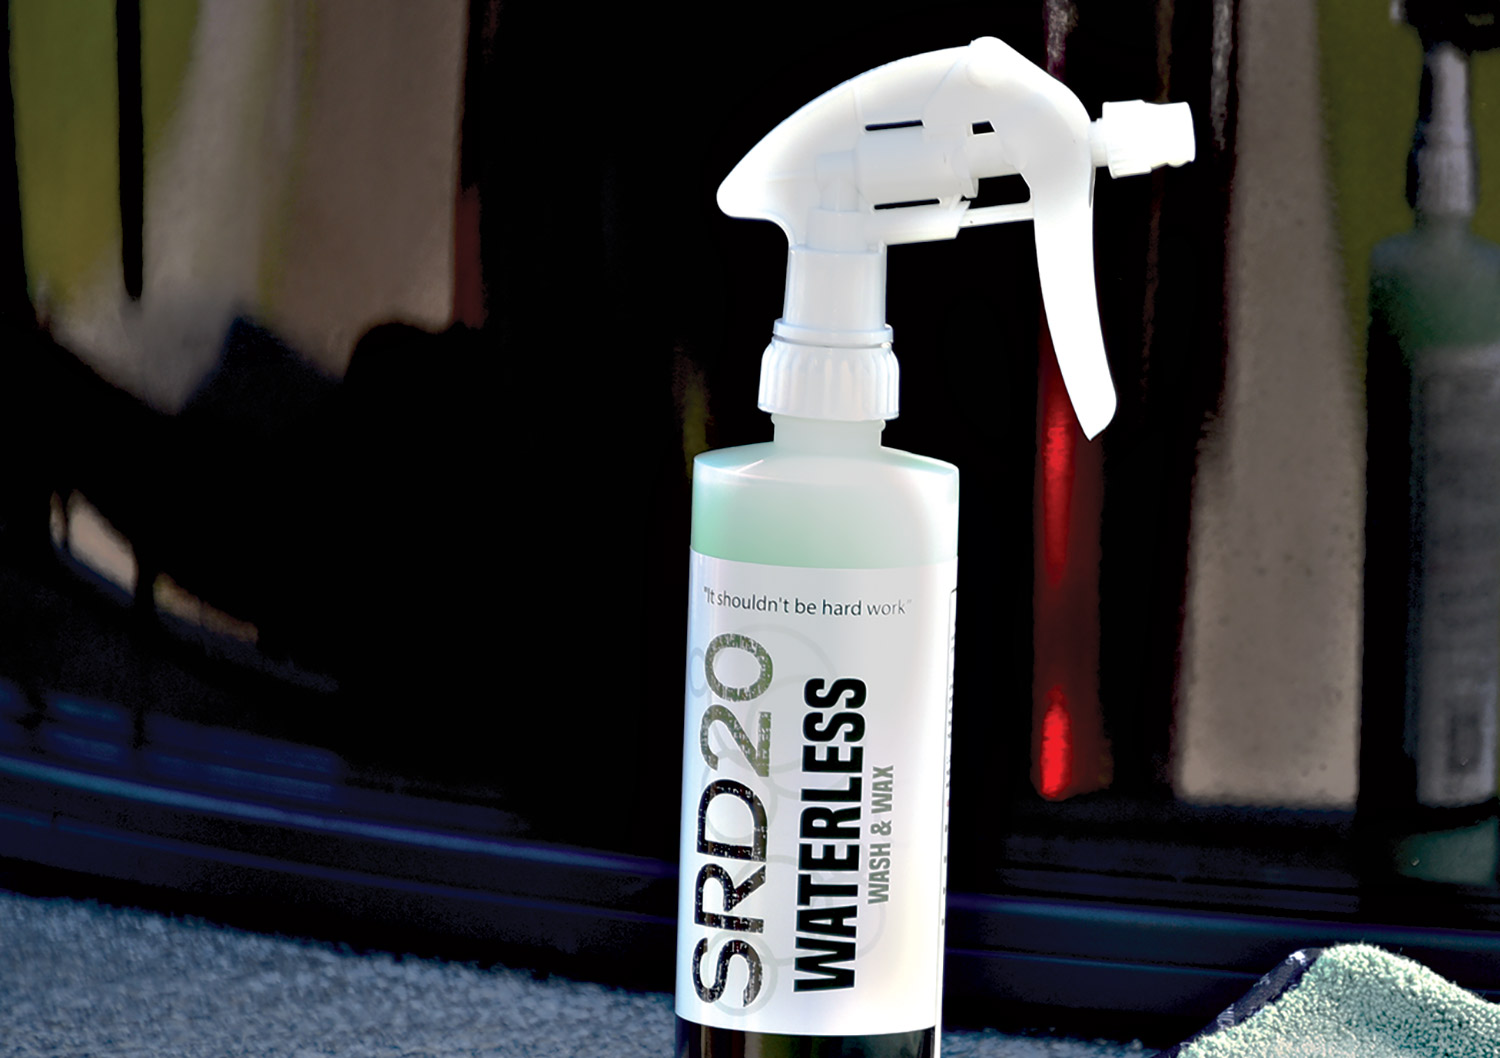 Close-up photograph perspective of the SRD20 Waterless Wash and Wax spray bottle product